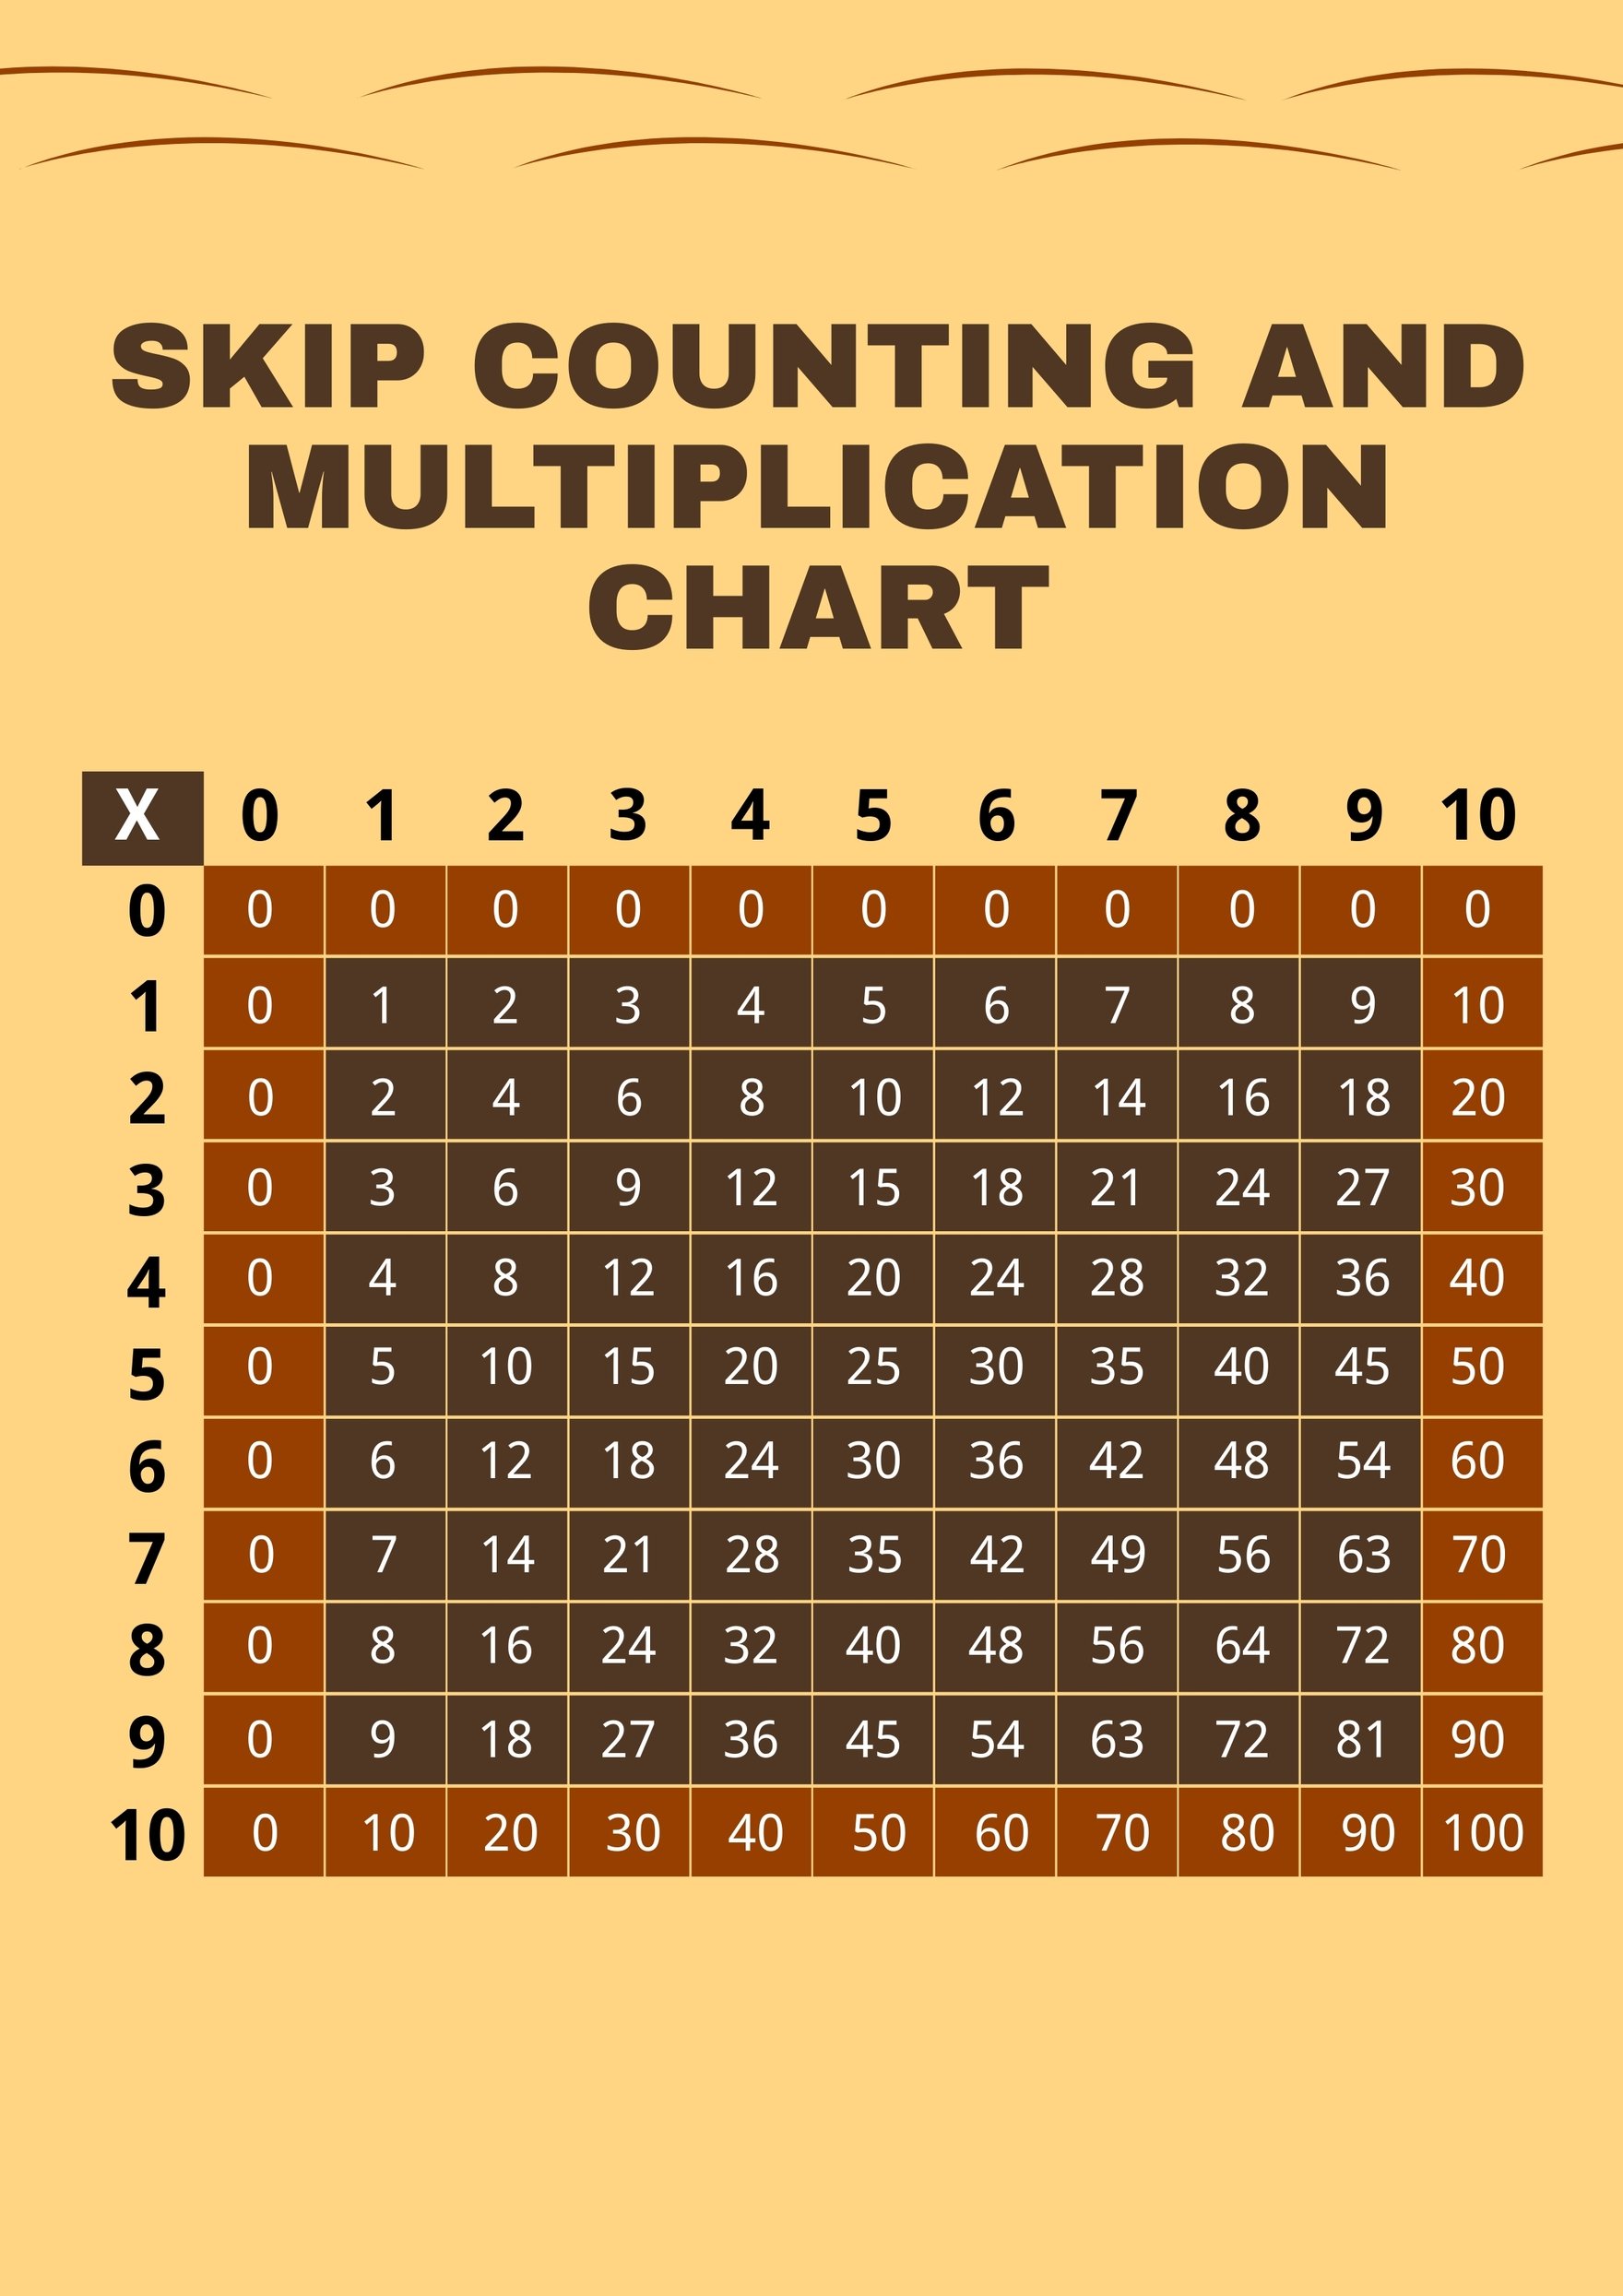 skip-counting-and-multiplication-chart-template-in-illustrator-pdf